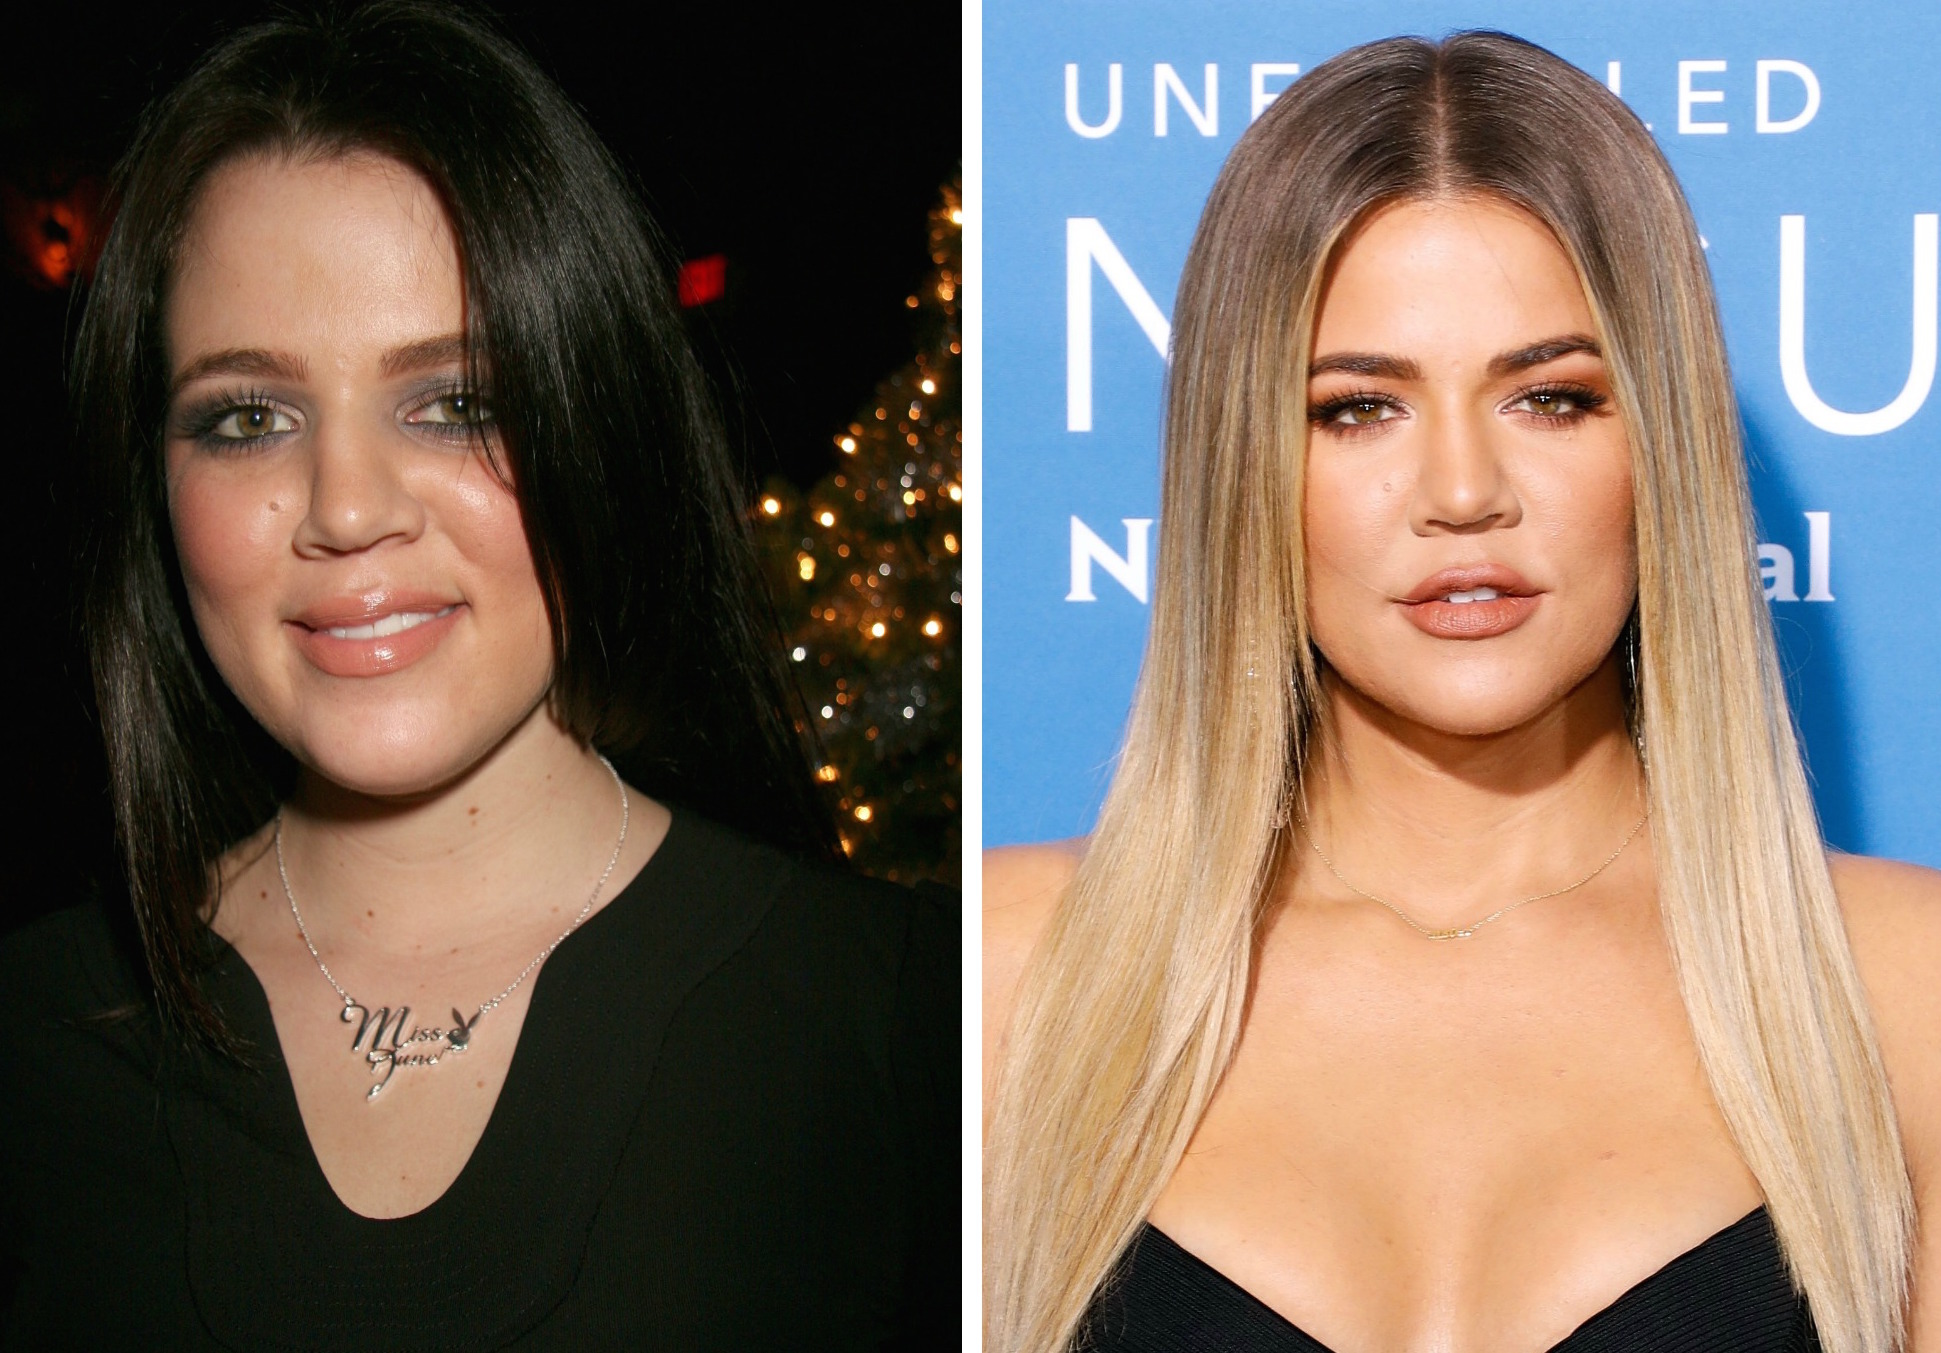 khloe-kardashian-before-and-after-plastic-surgery.jpg